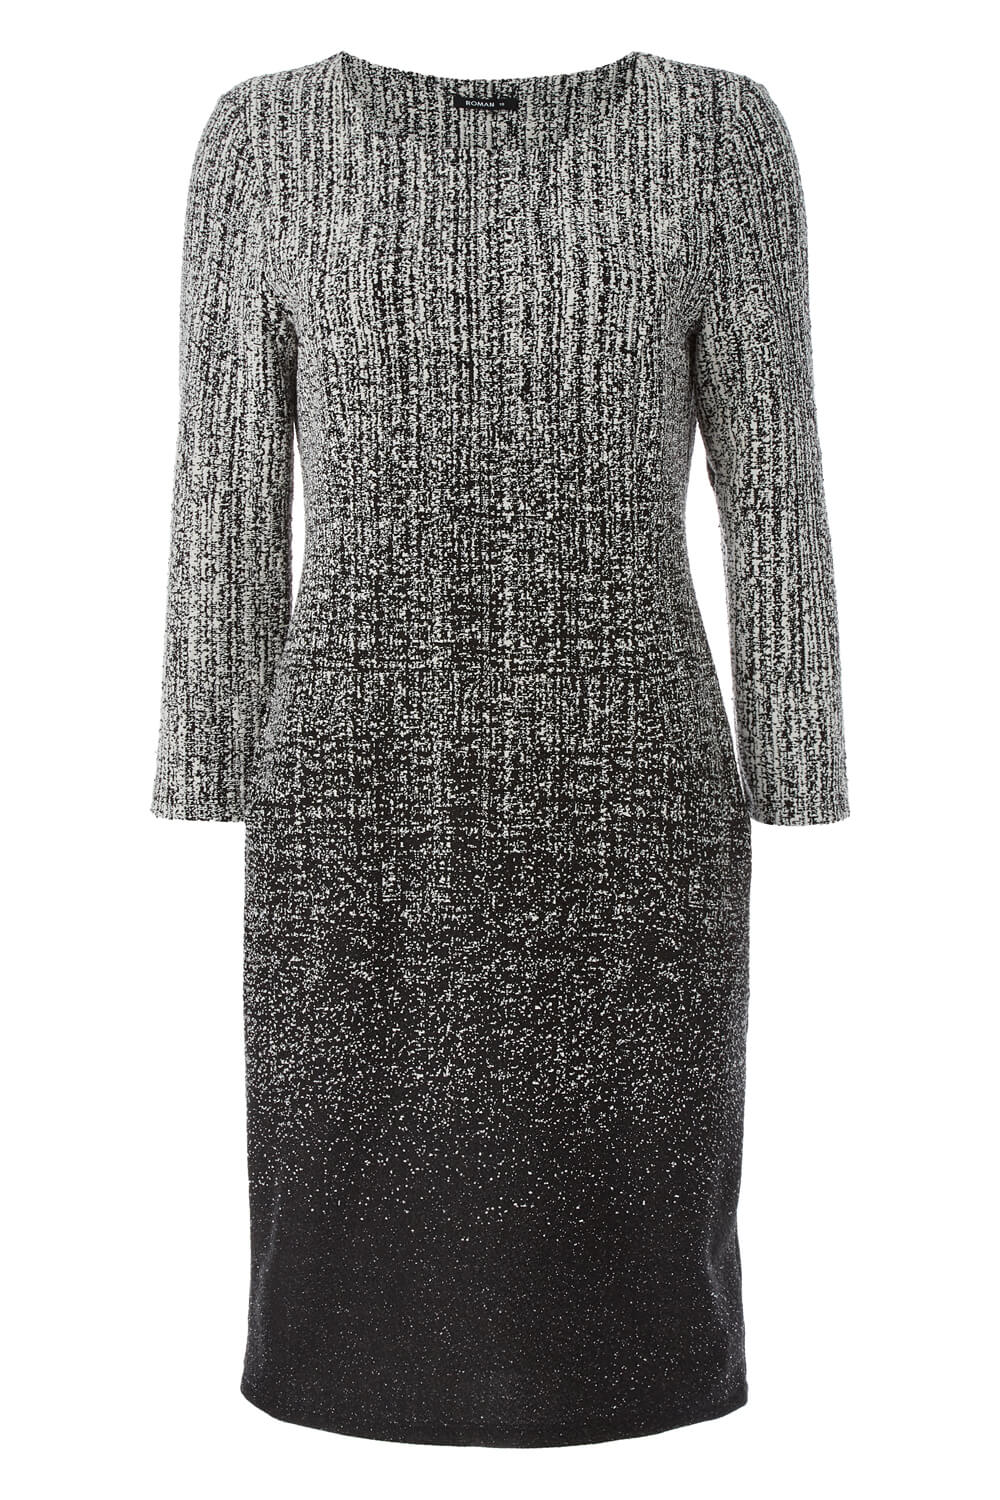 Black Ombre Textured Shift Dress, Image 4 of 4